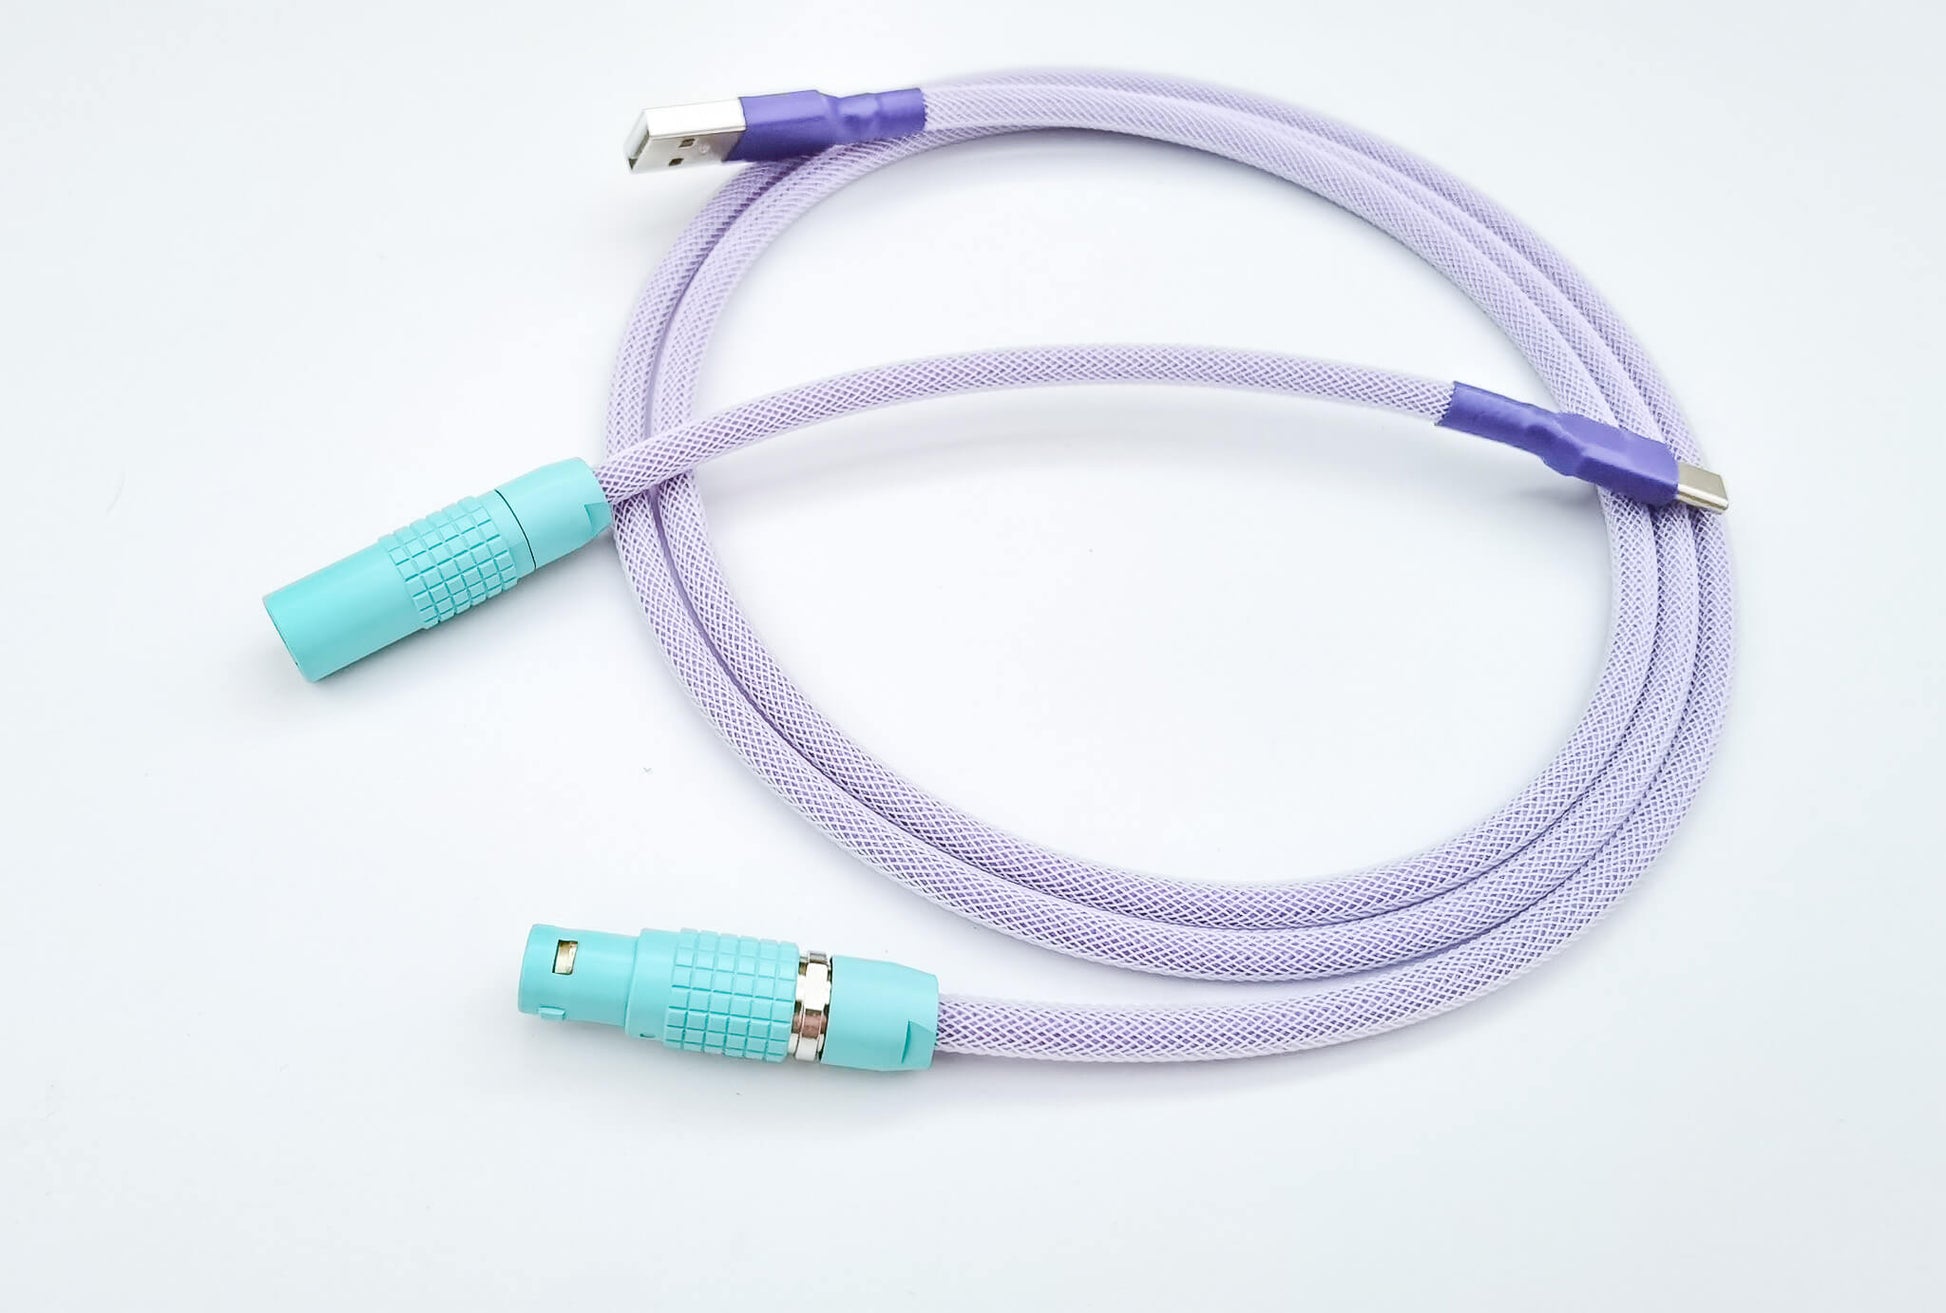 Custom Lemo keyboard cable with painted Lemo connector